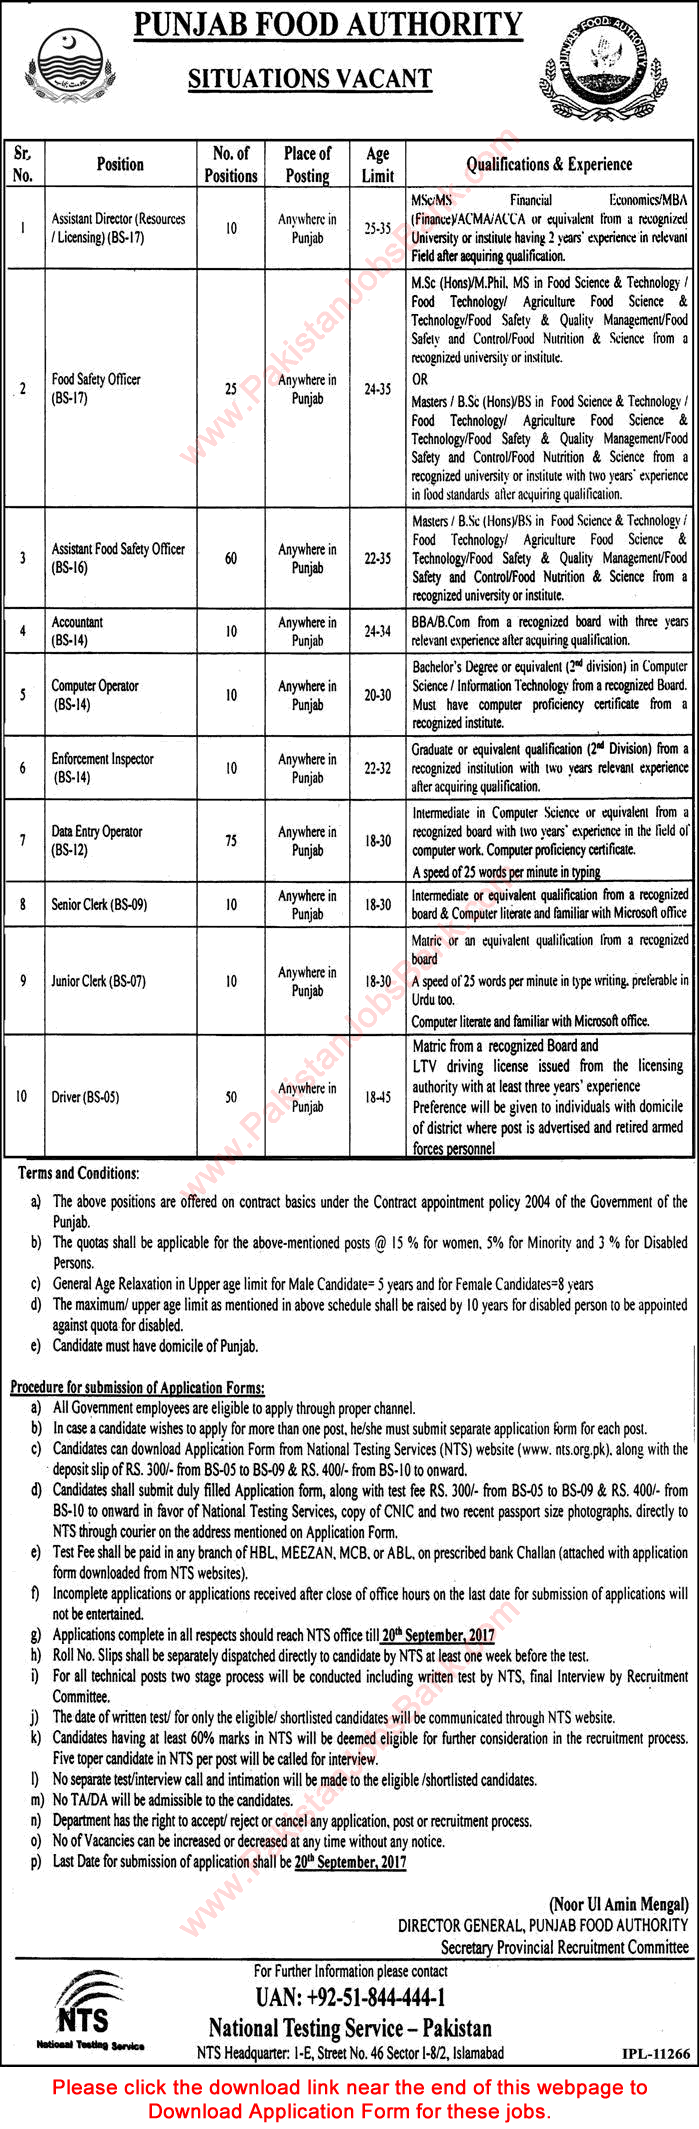 Punjab Food Authority Jobs August 2017 NTS Application Form Food Safety Officers, DEO, Drivers & Others Latest